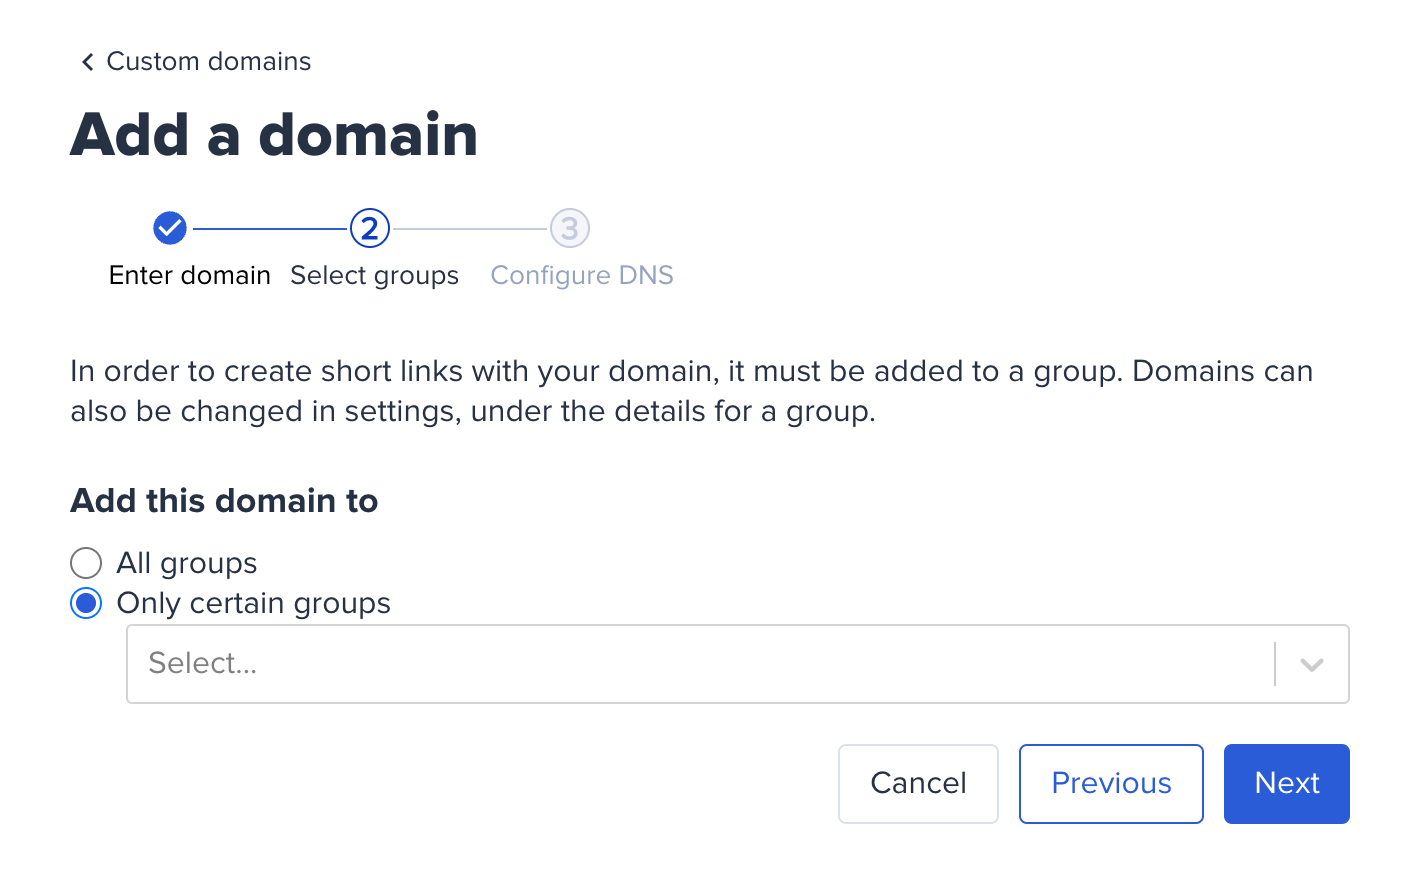 add a domain with only certain groups checked off (all groups left unchecked)